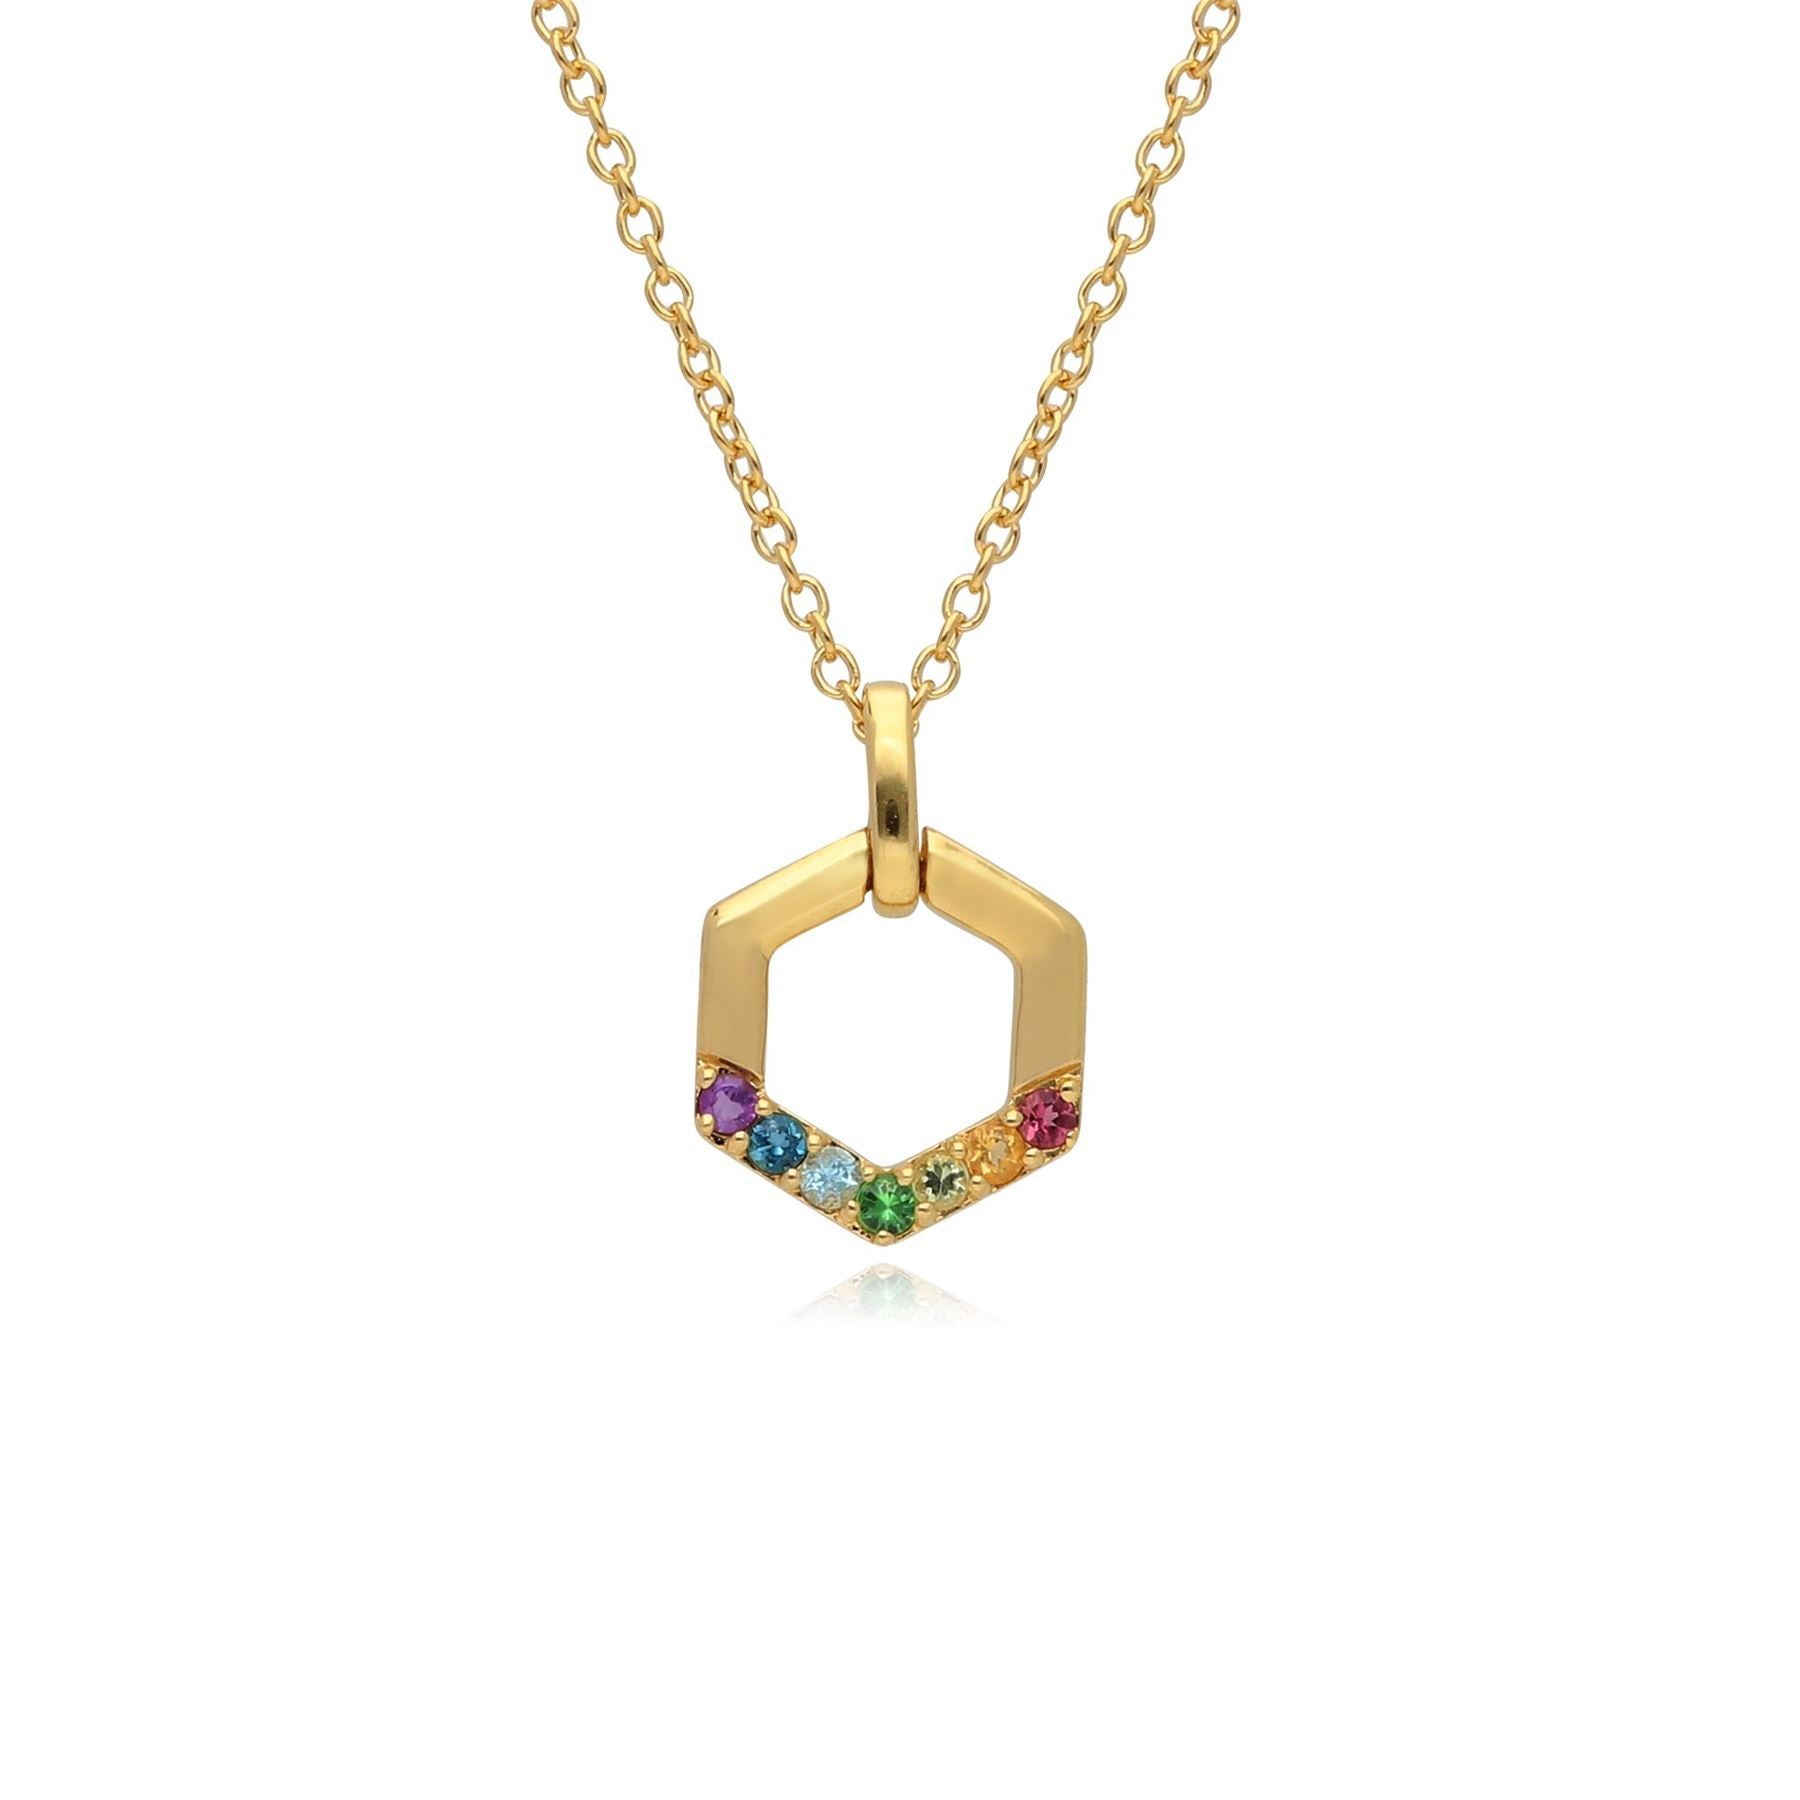 Rainbow Hexagon Necklace in Gold Plated Sterling Silver